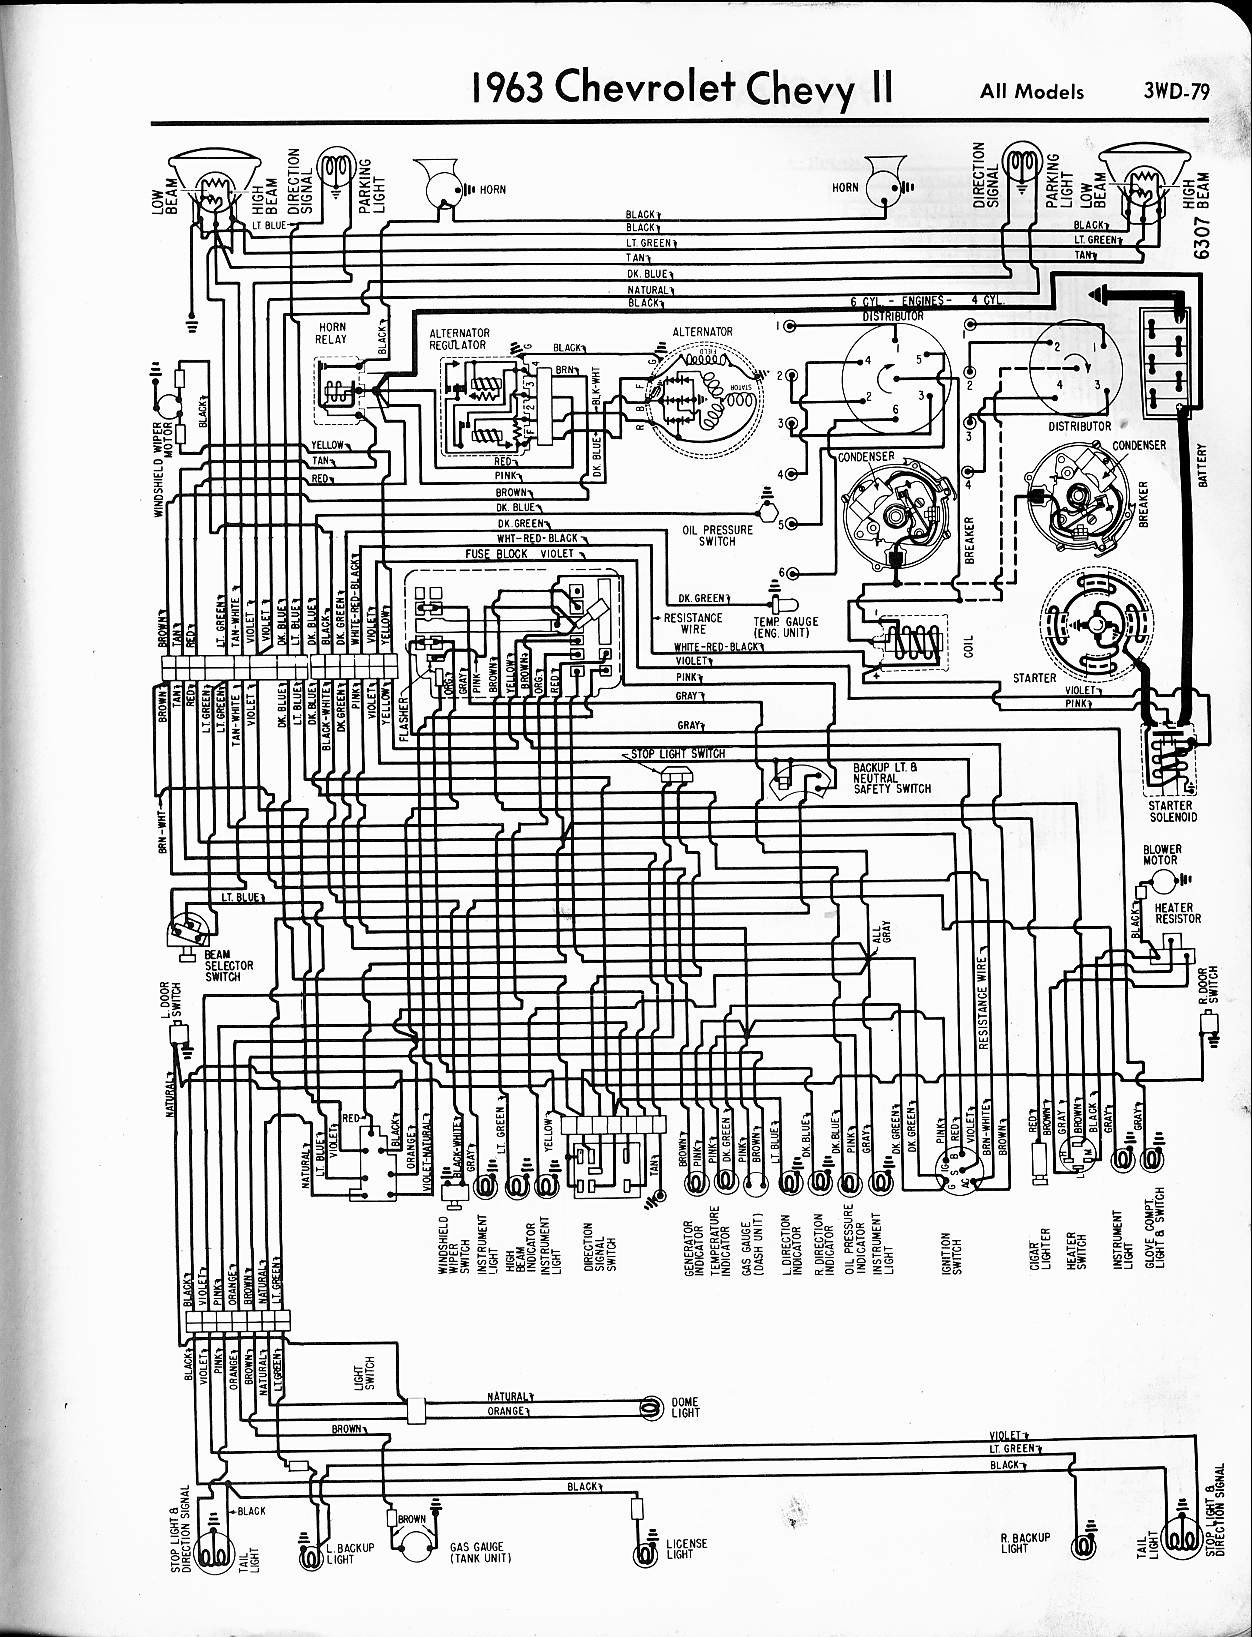 Chevrolet Truck Wiring Diagrams 57 65 Chevy Wiring Diagrams Of Chevrolet Truck Wiring Diagrams